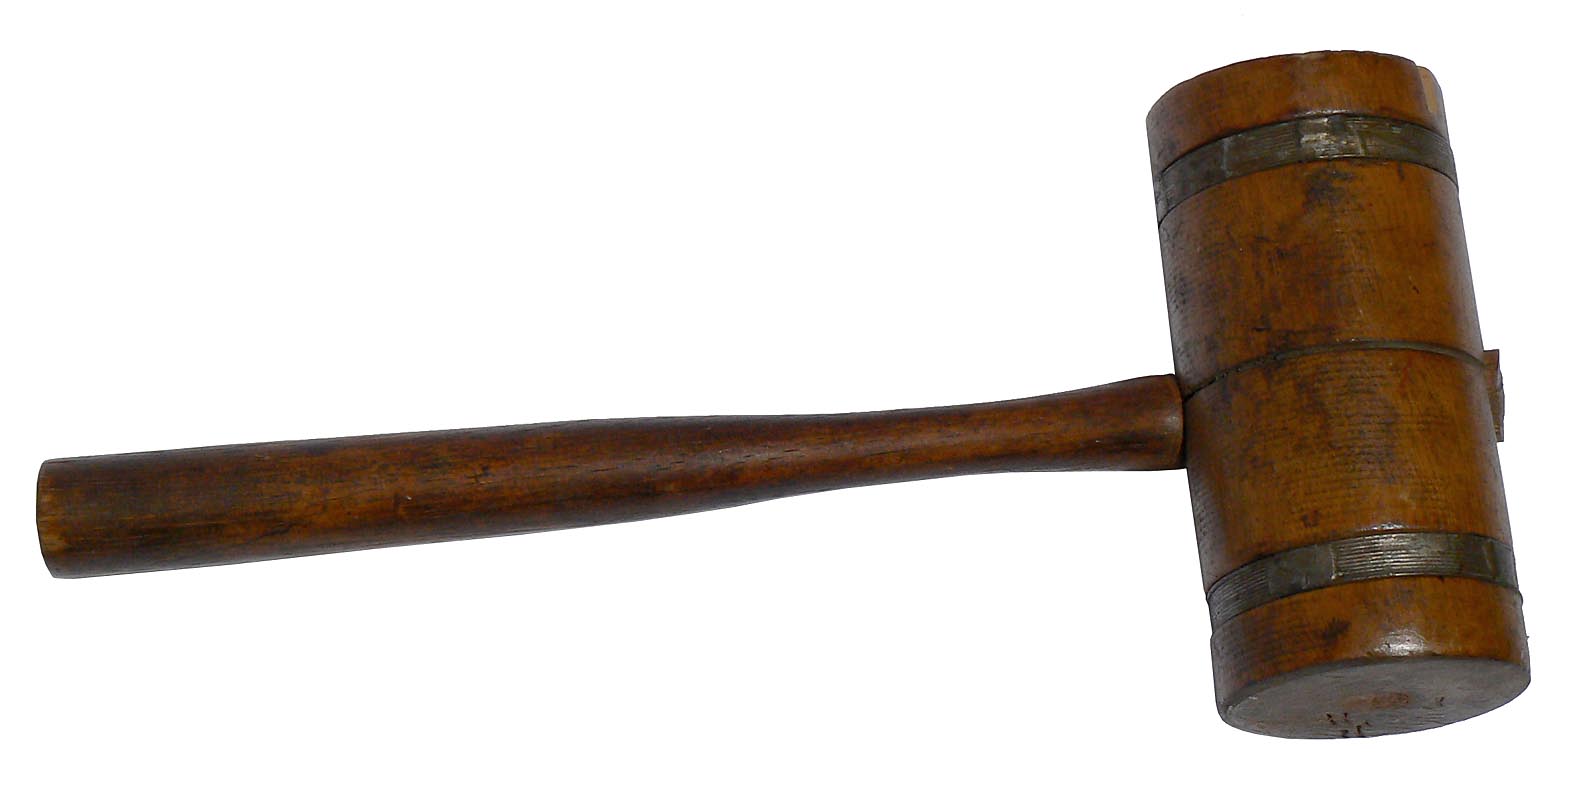 Primitive wooden mallet with good patina